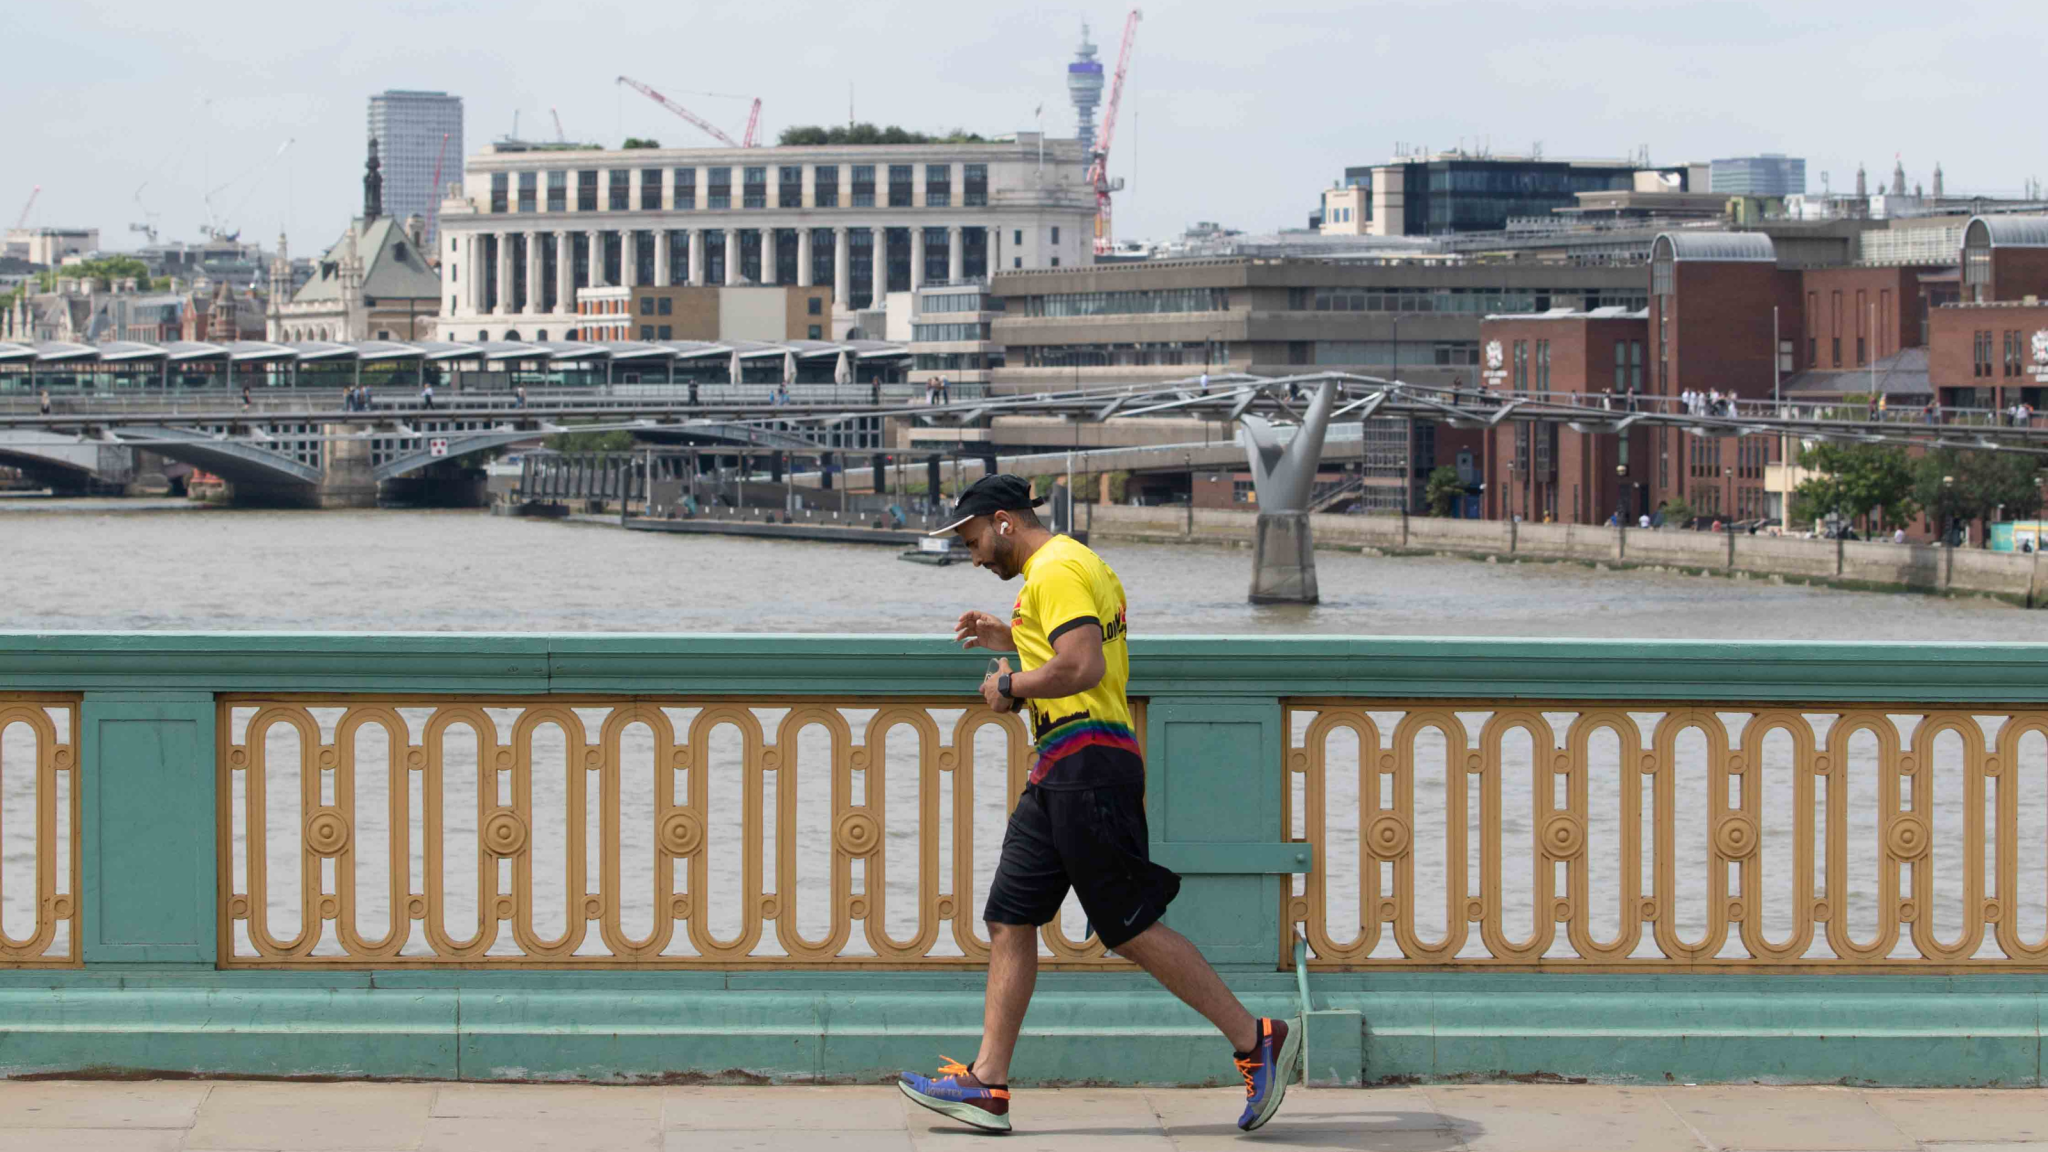 A jogger runs across Southwark Bridge, with the river and Millennium Bridge in the background.